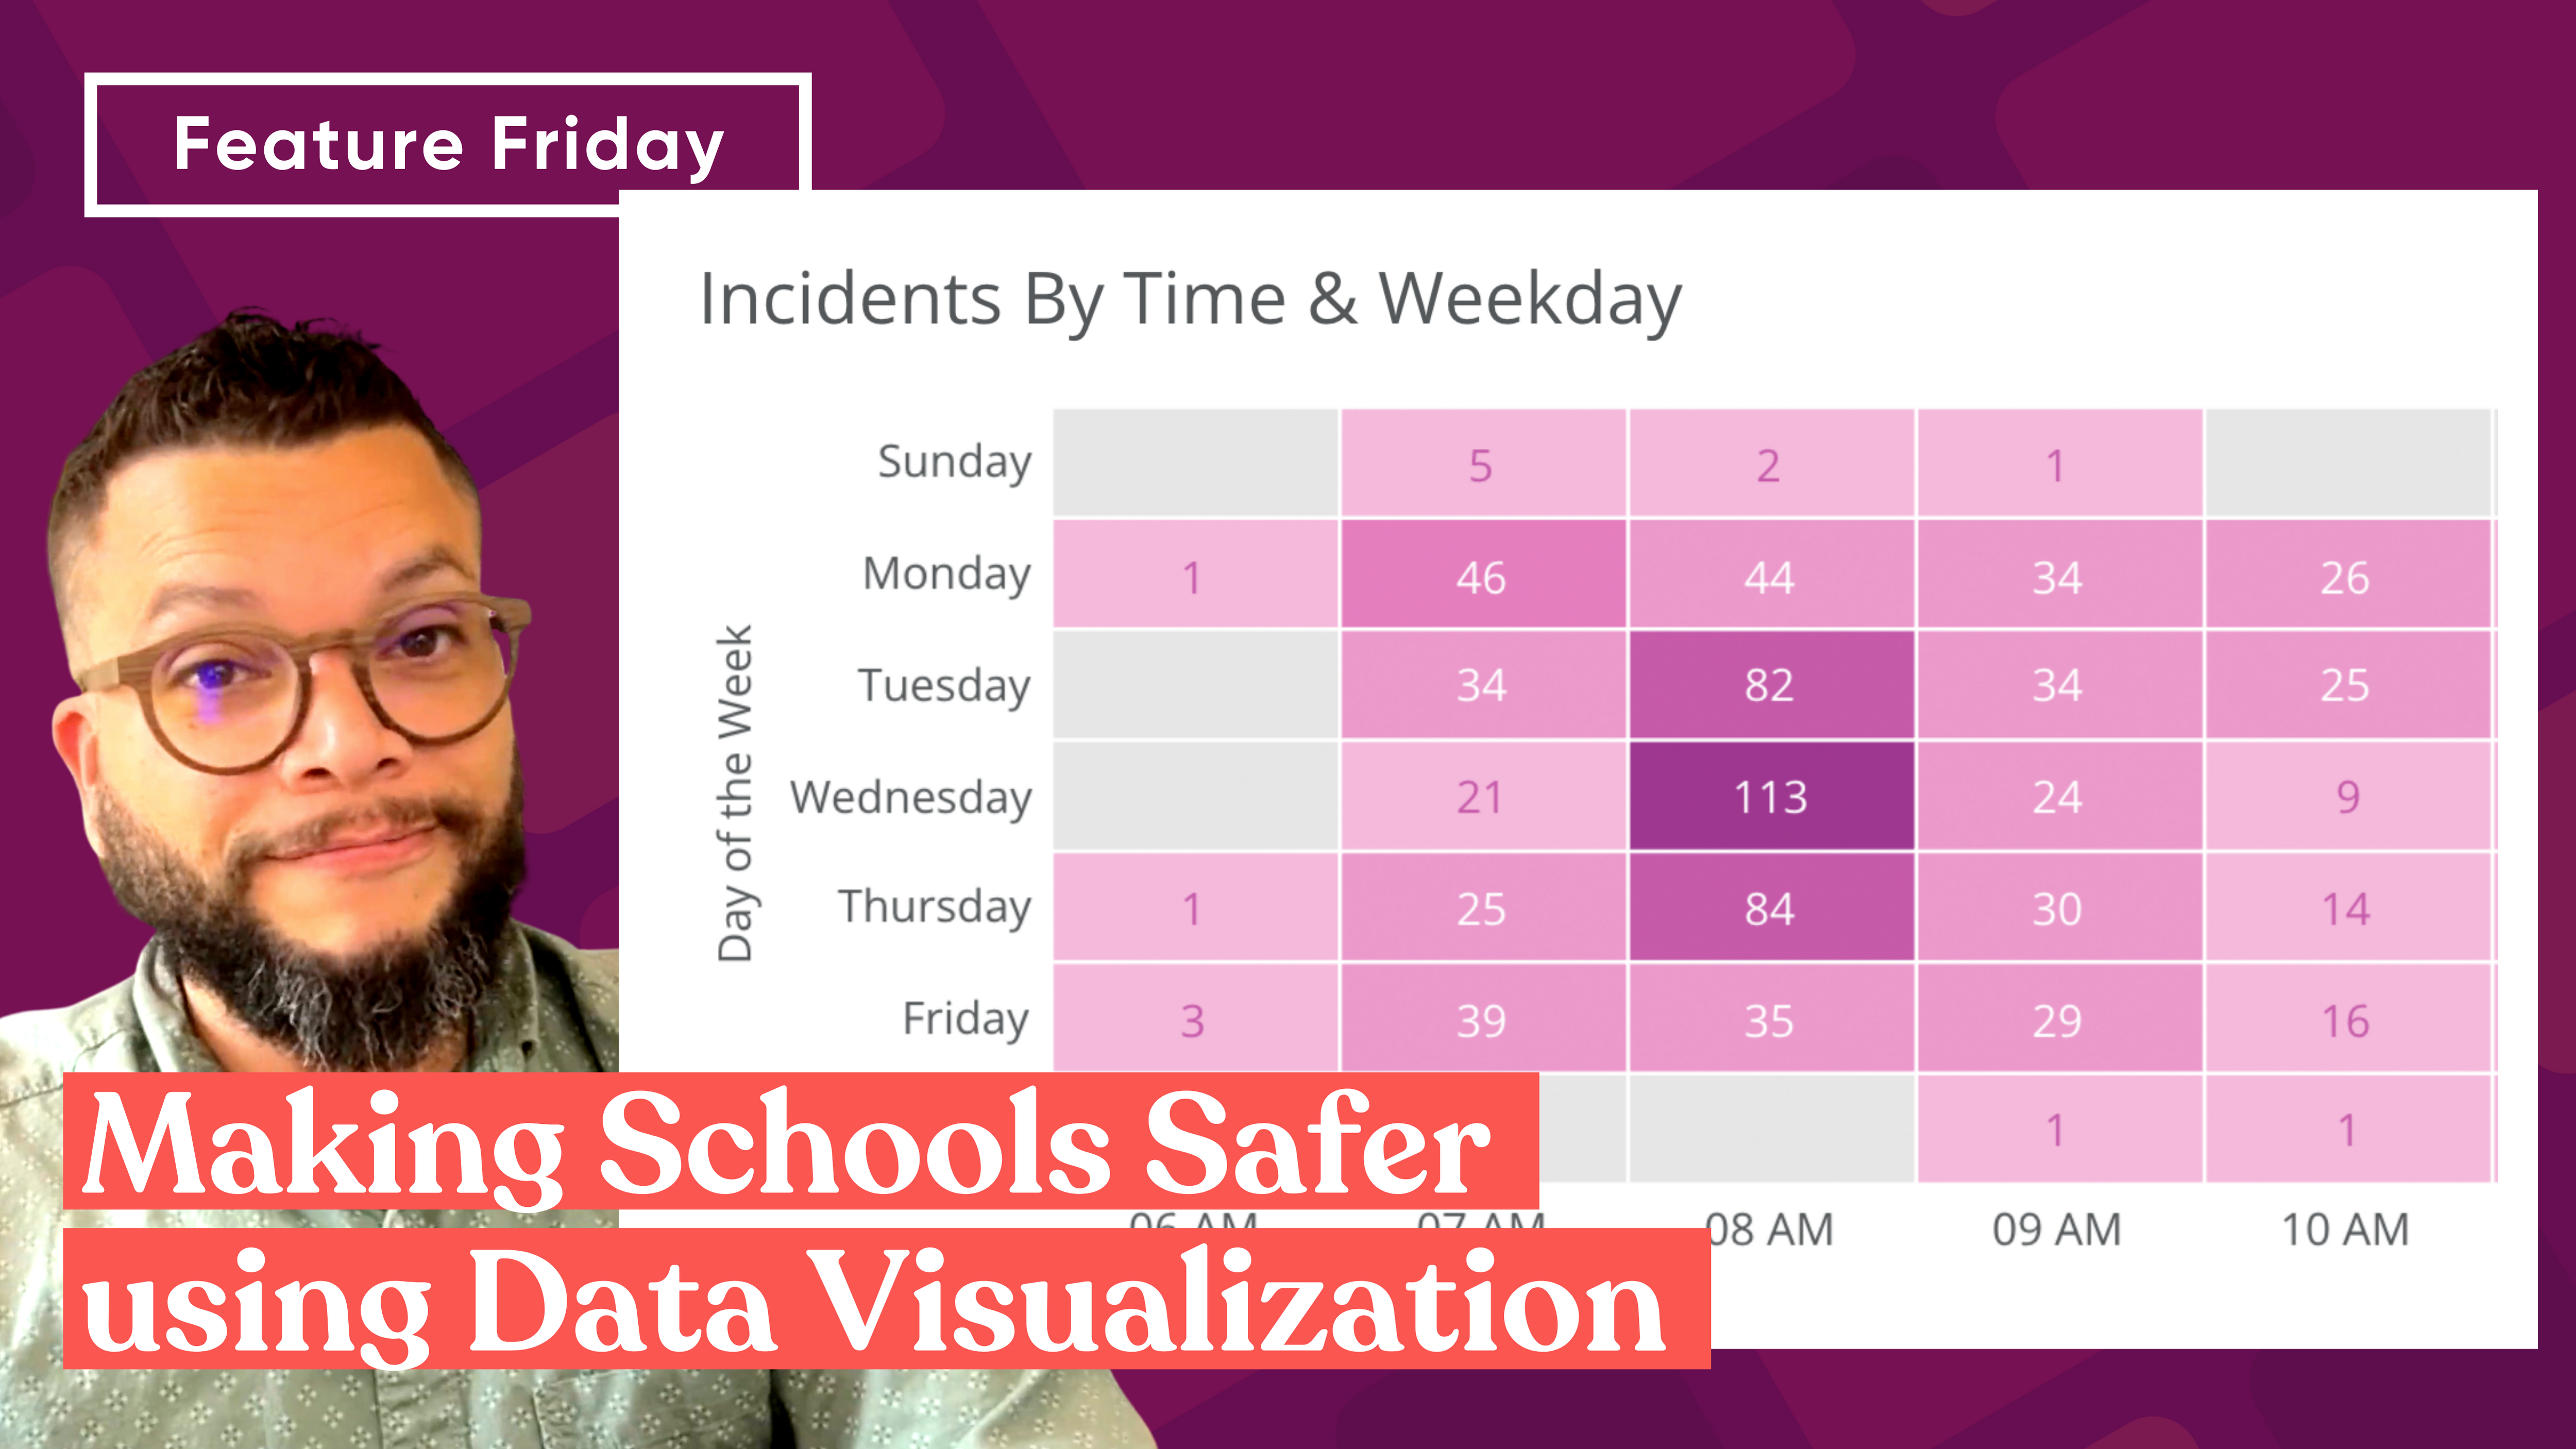 Thumbnail of Feature Friday video on visualizing student behavior data